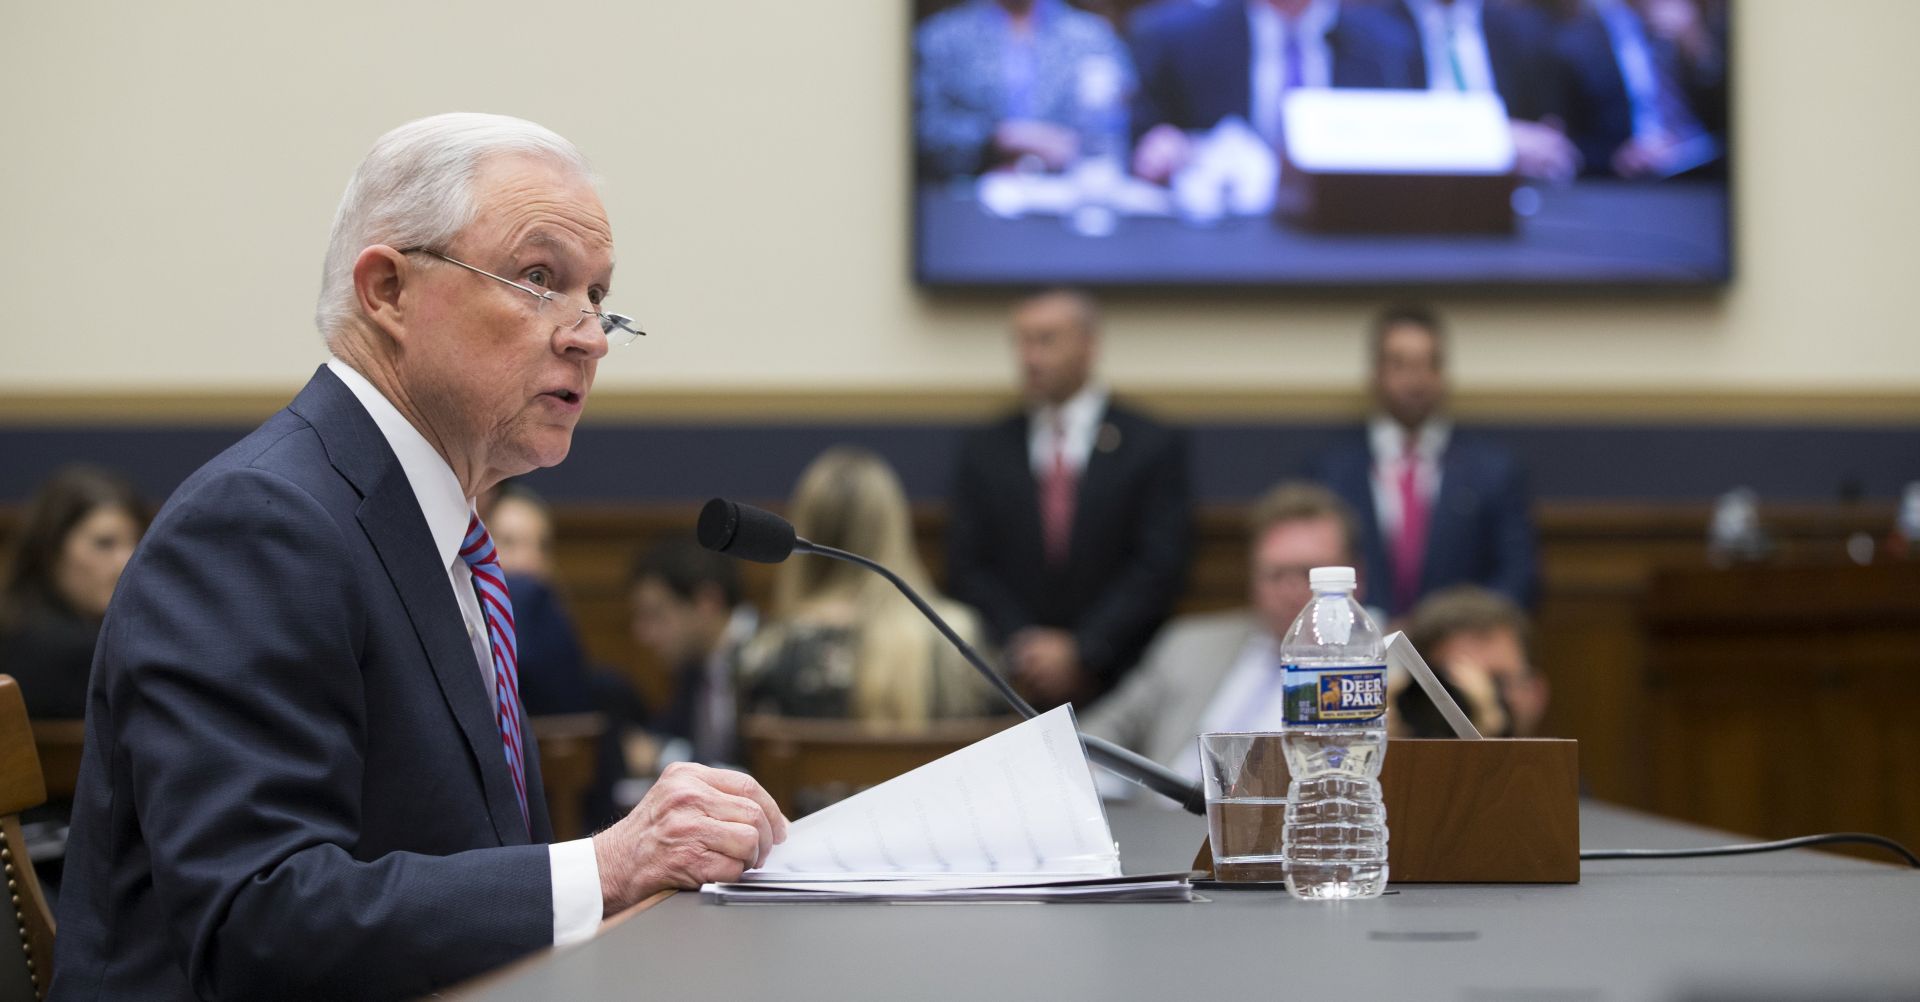 epa06328849 US Attorney General Jeff Sessions testifies before the House Judiciary Committee hearing on oversight of the Justice Department on Capitol Hill in Washington, DC, USA, 14 November 2017.  EPA/MICHAEL REYNOLDS